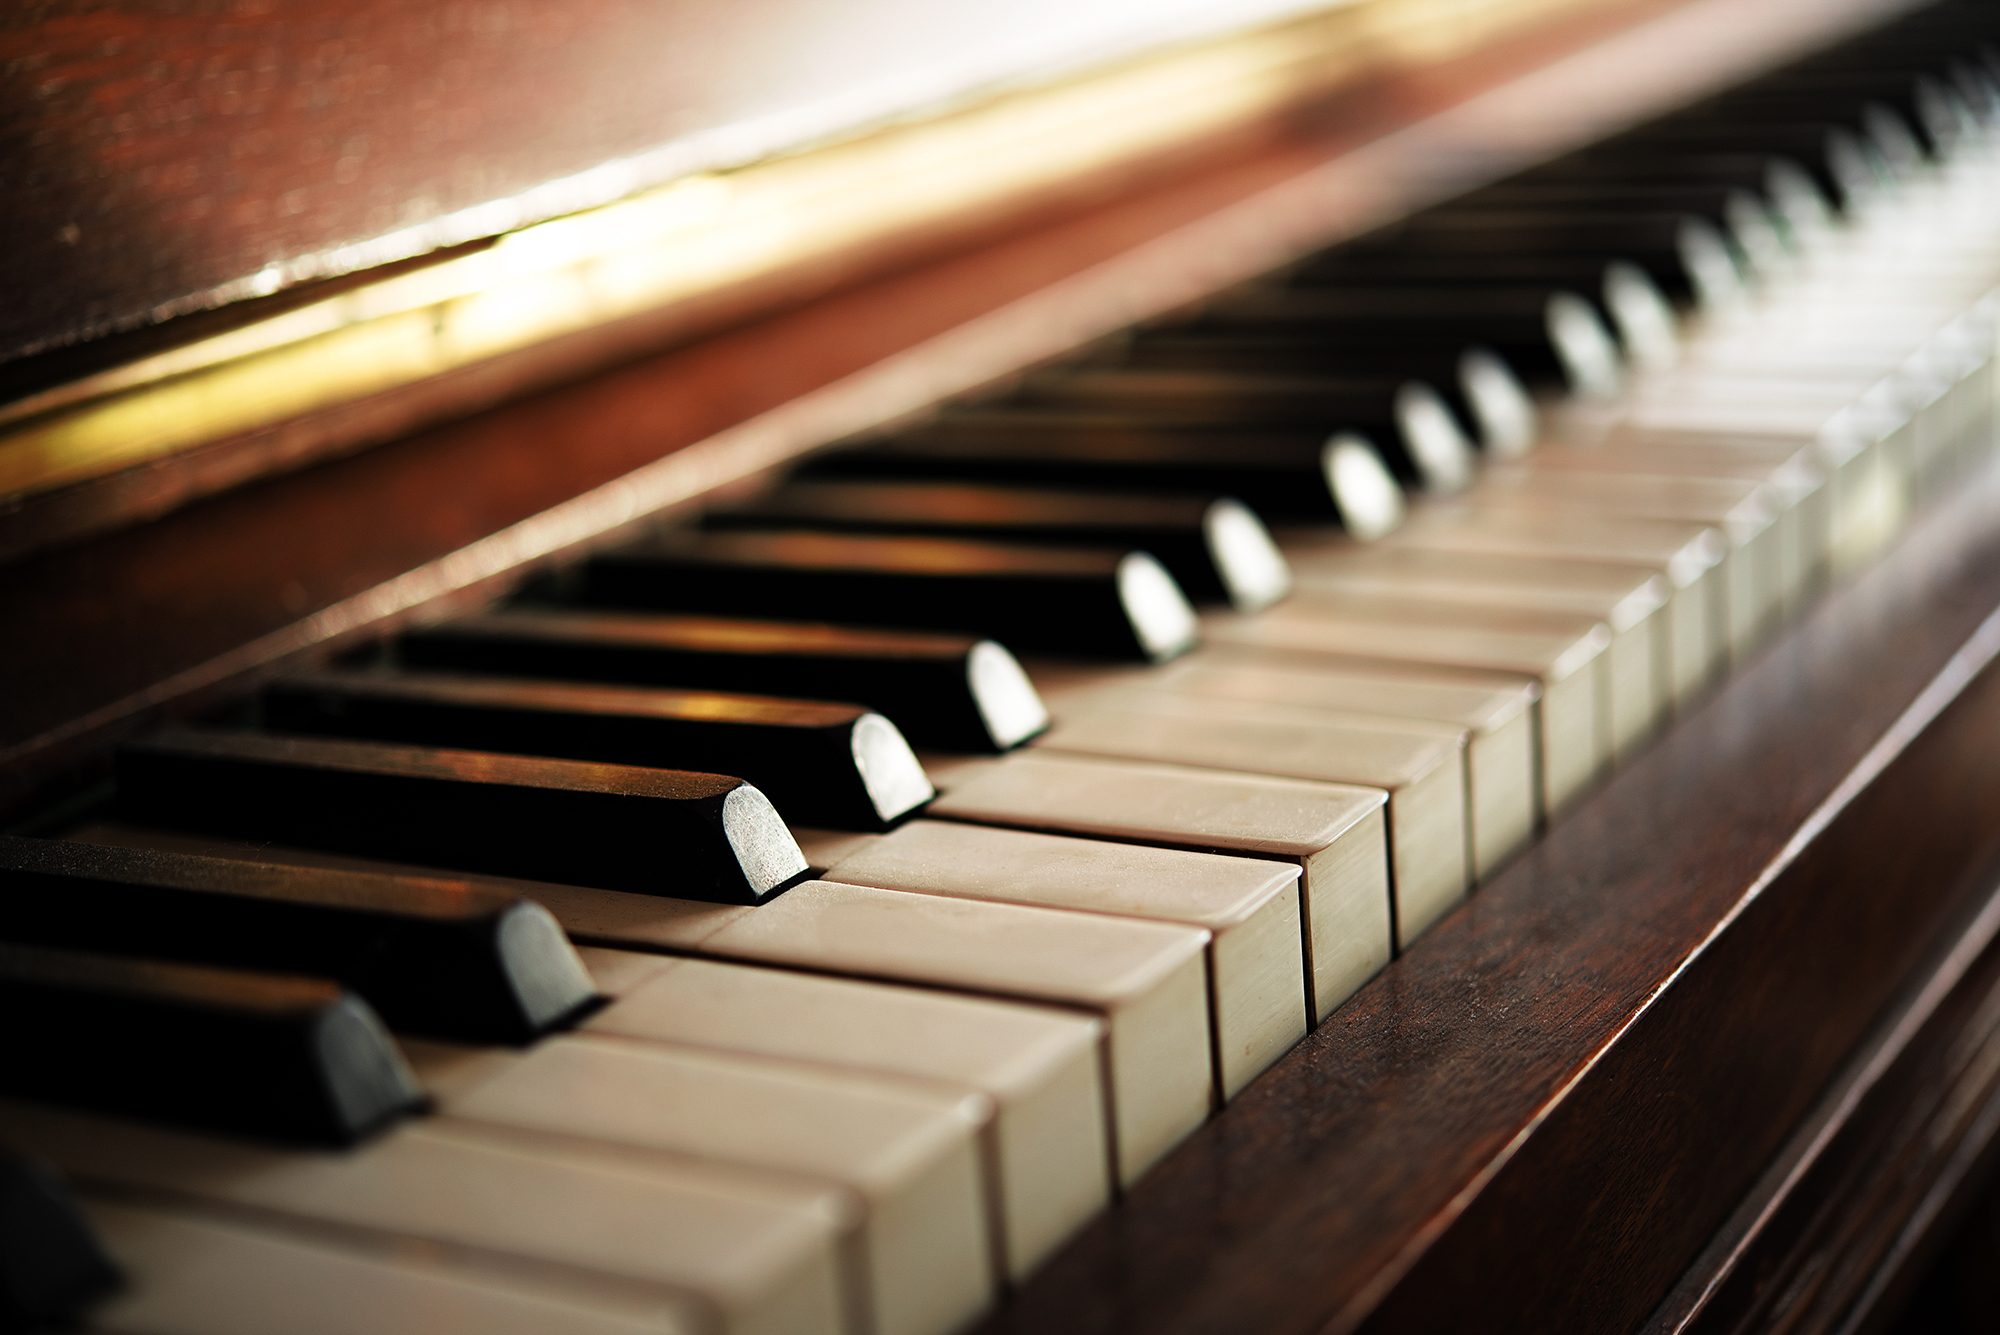 Piano keyboard of an old music instrument, close up